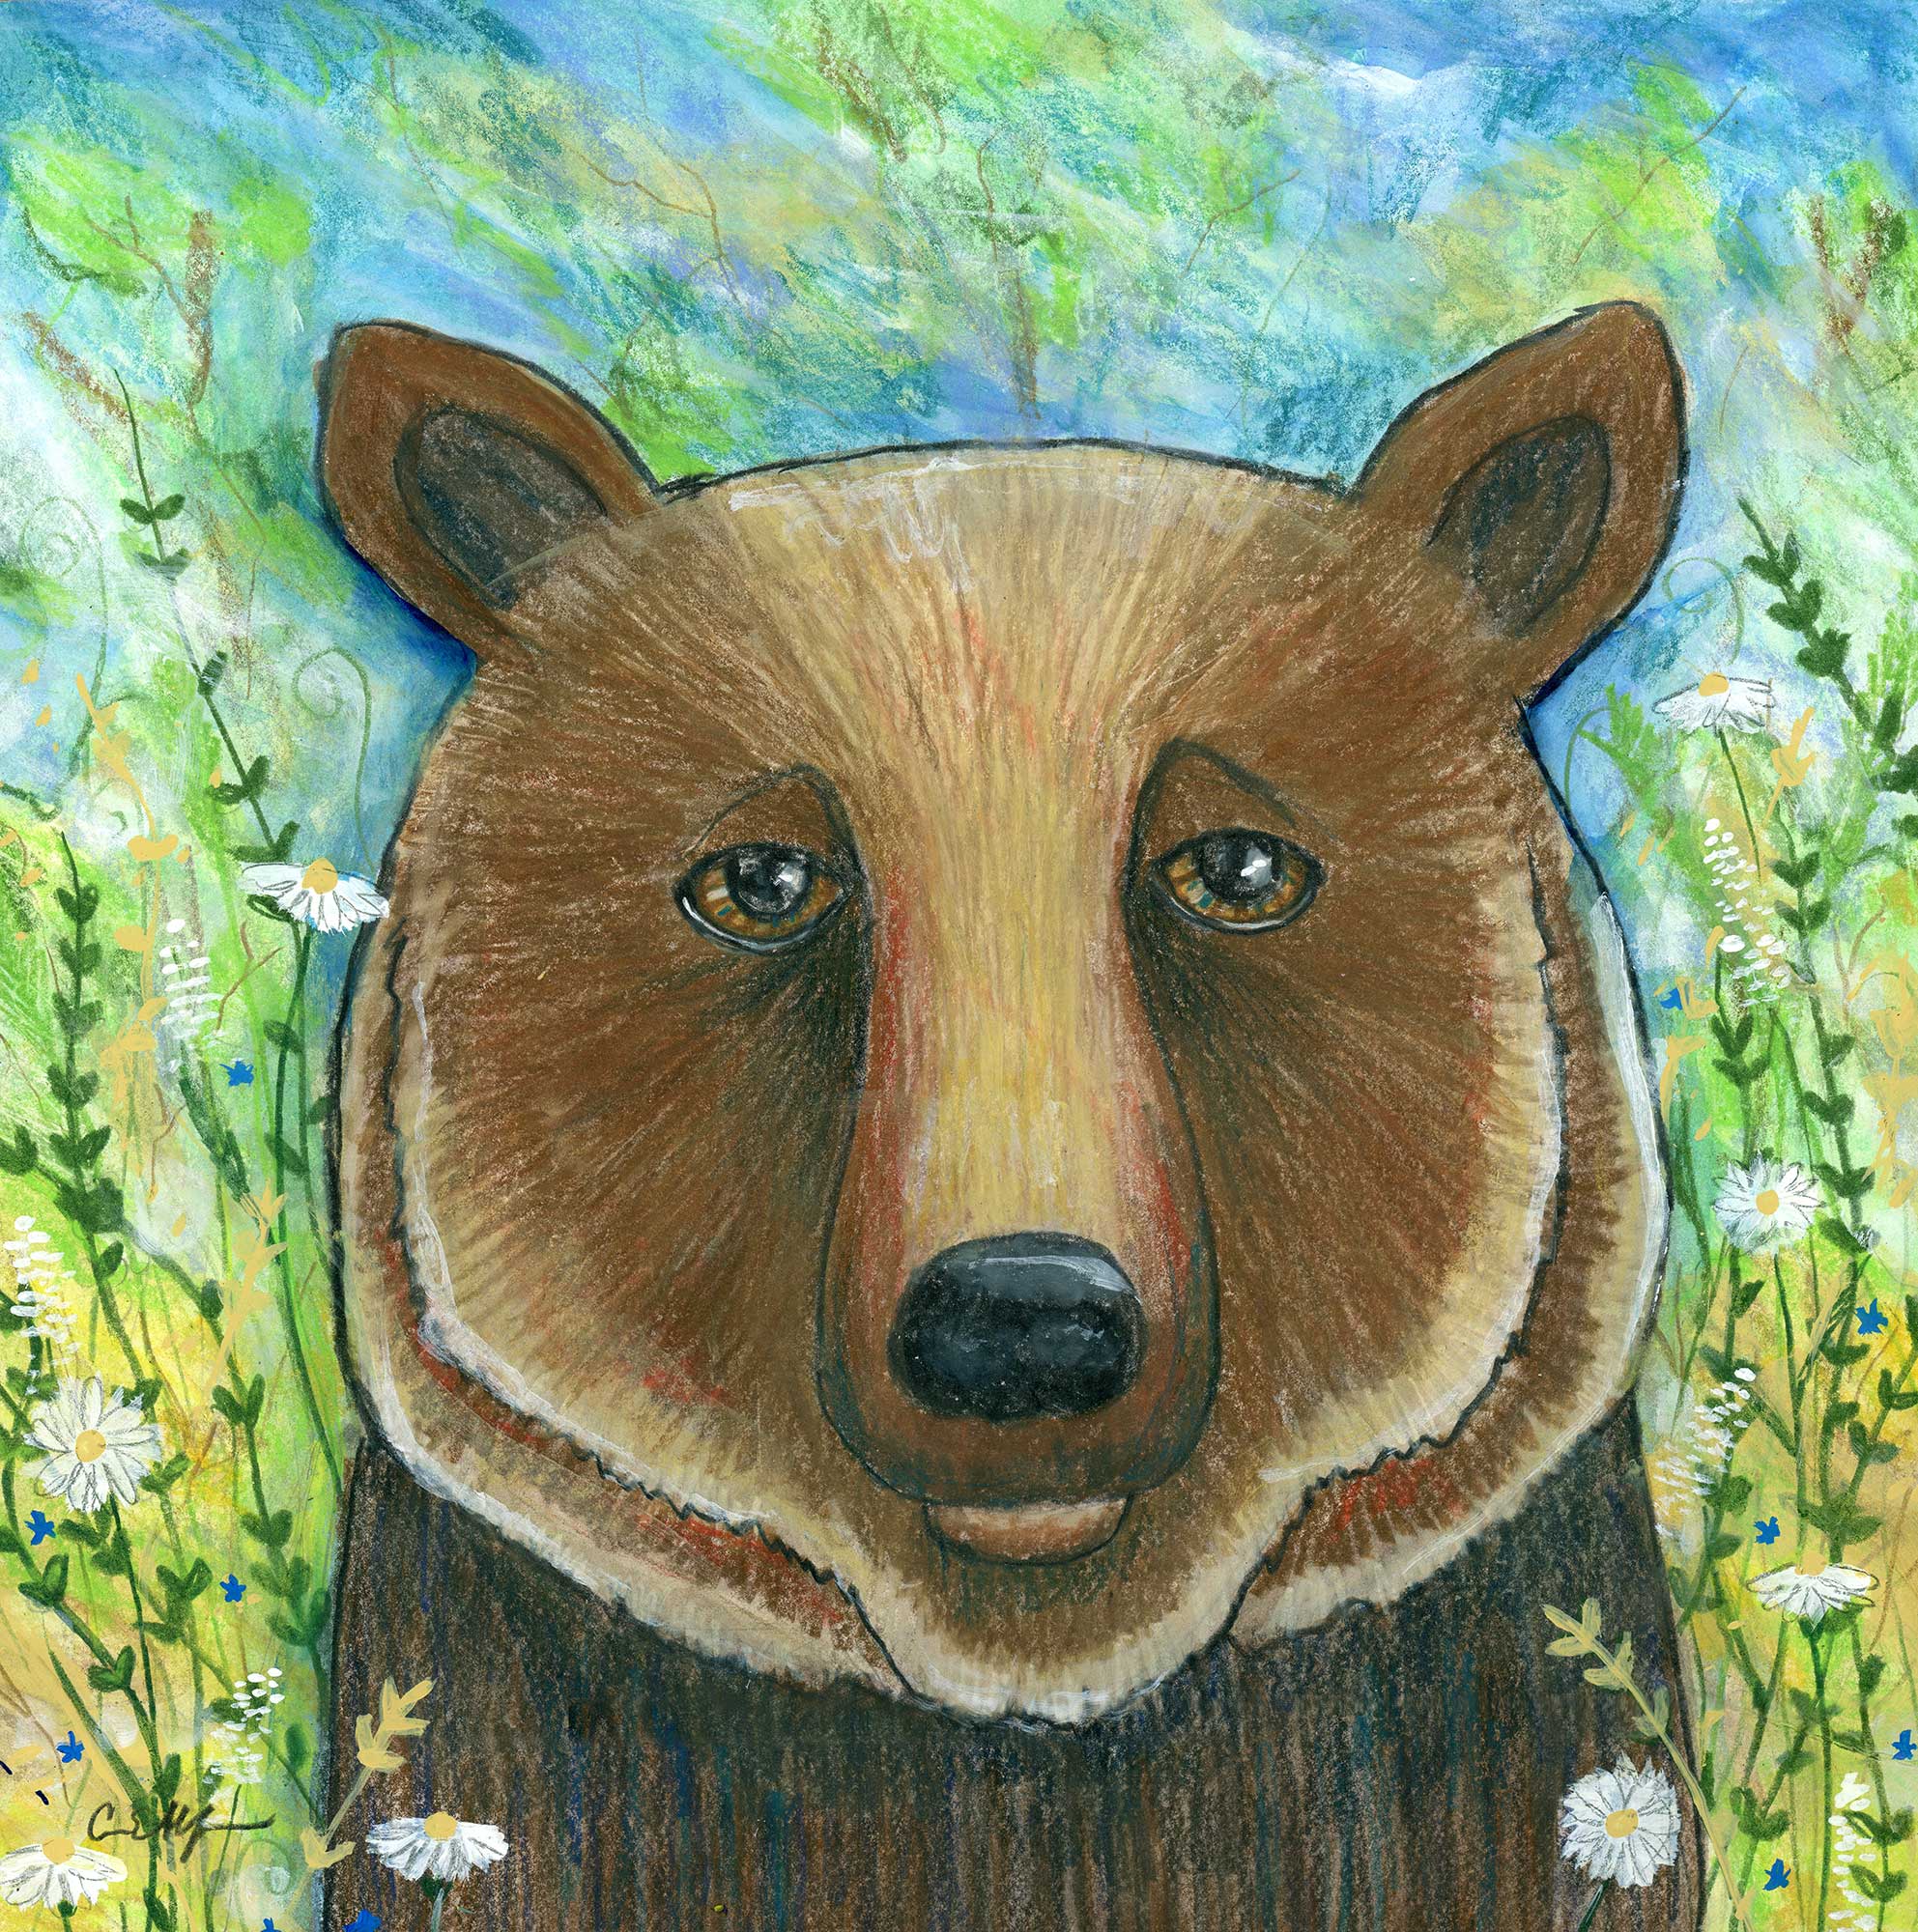 SOLD - "Bear in Flowers", 12" x 12", mixed media